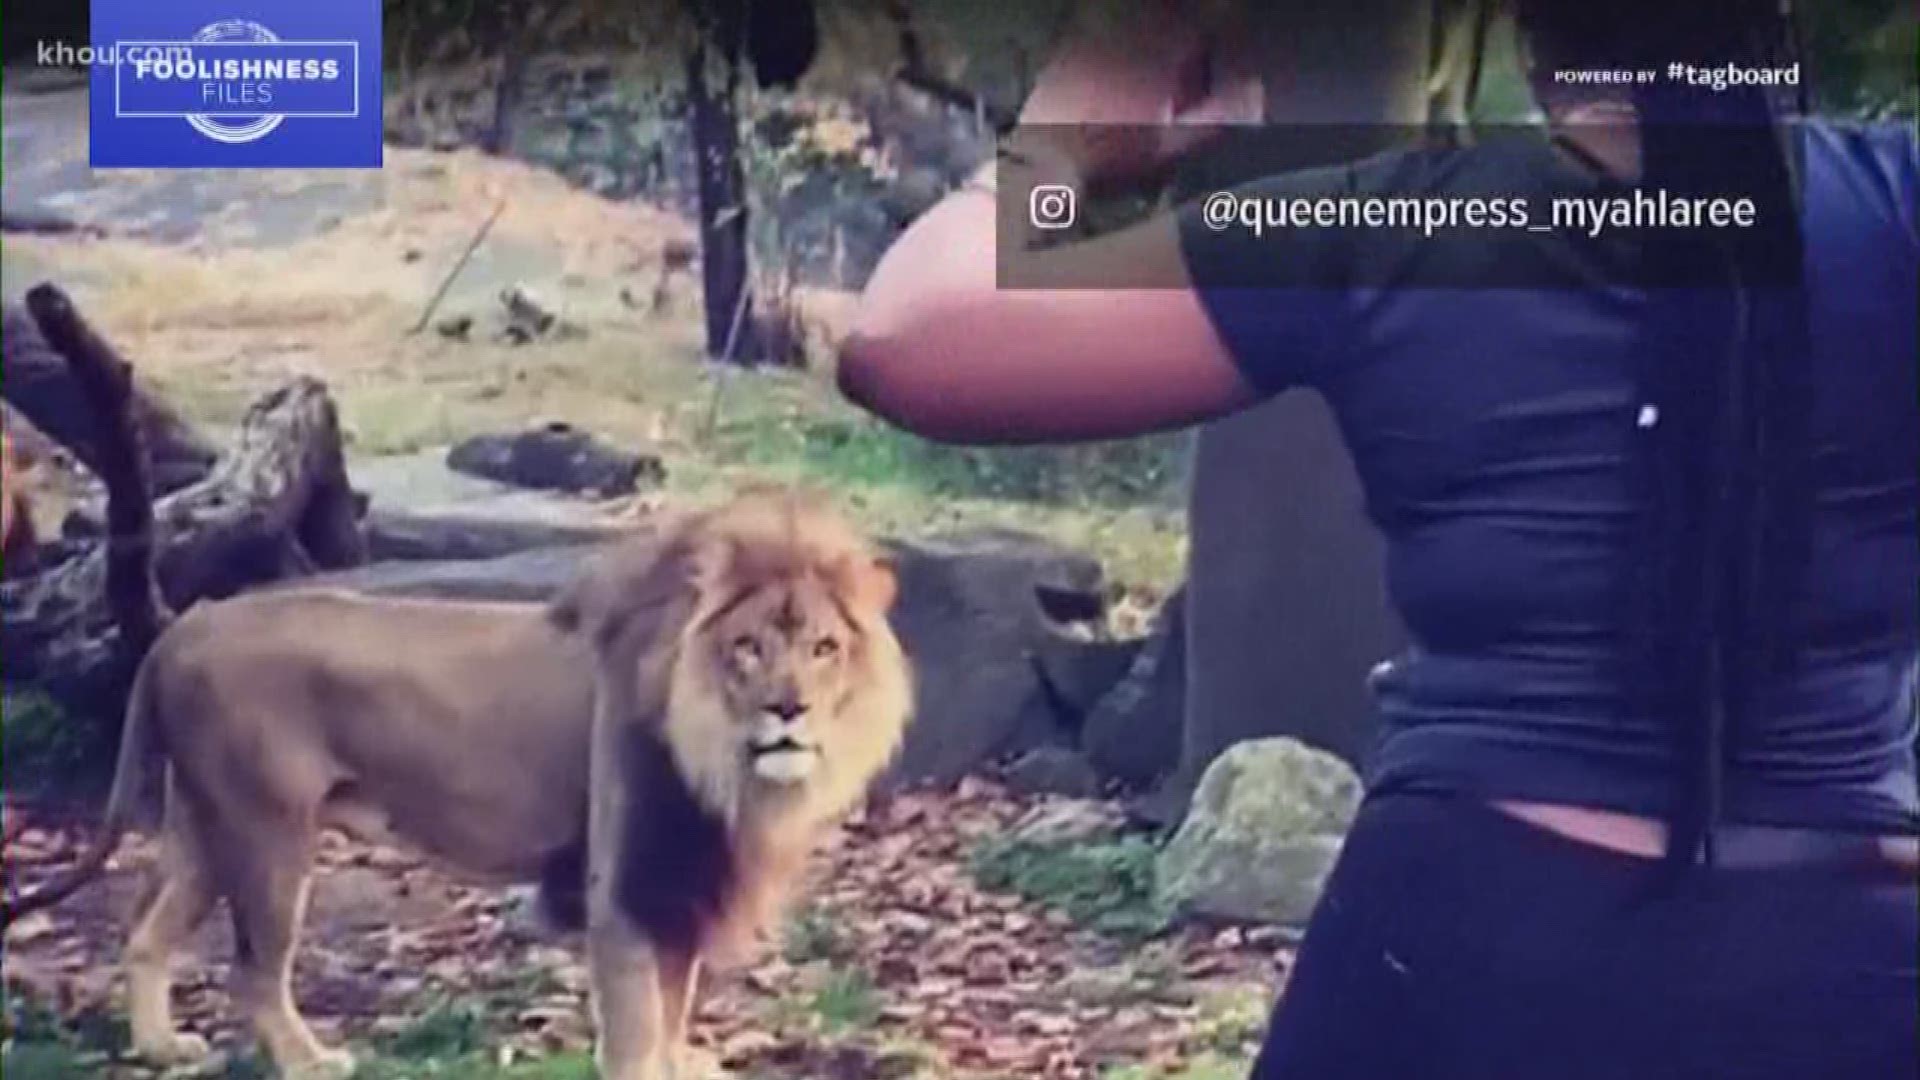 Police in New York City are looking for a woman caught on camera taunting a lion.